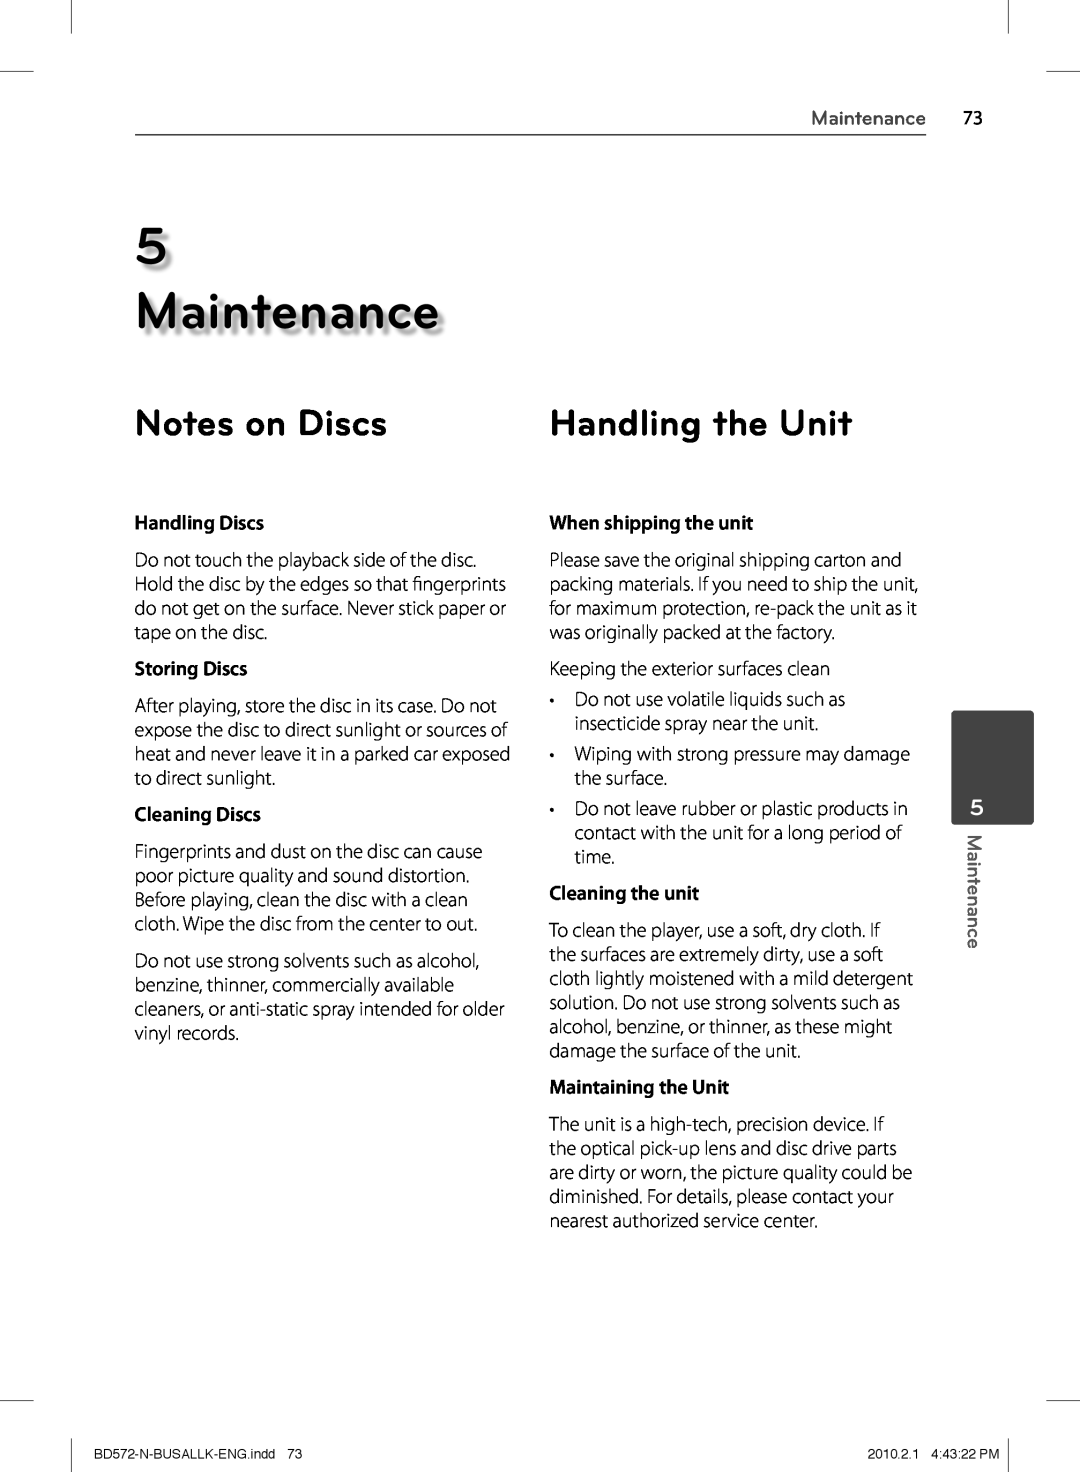 LG Electronics BD570 owner manual Maintenance, Notes on Discs, Handling the Unit 